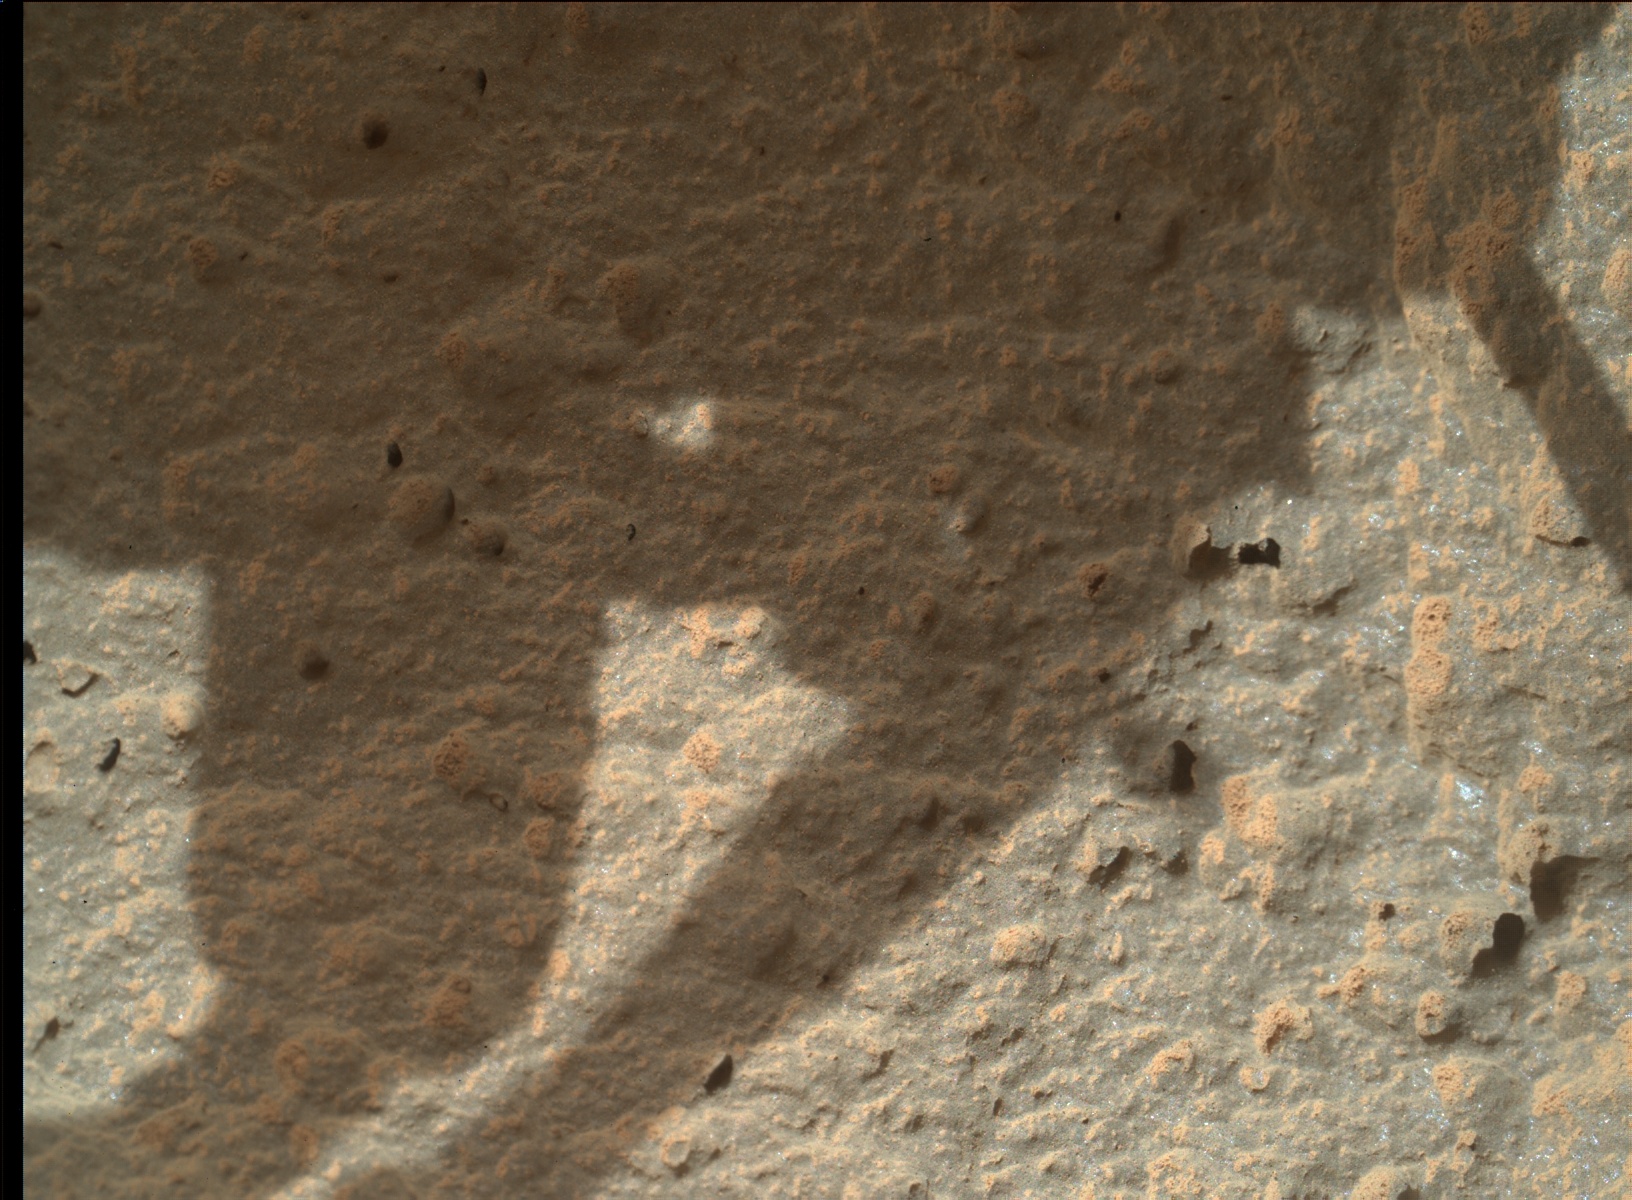 Nasa's Mars rover Curiosity acquired this image using its Mars Hand Lens Imager (MAHLI) on Sol 694